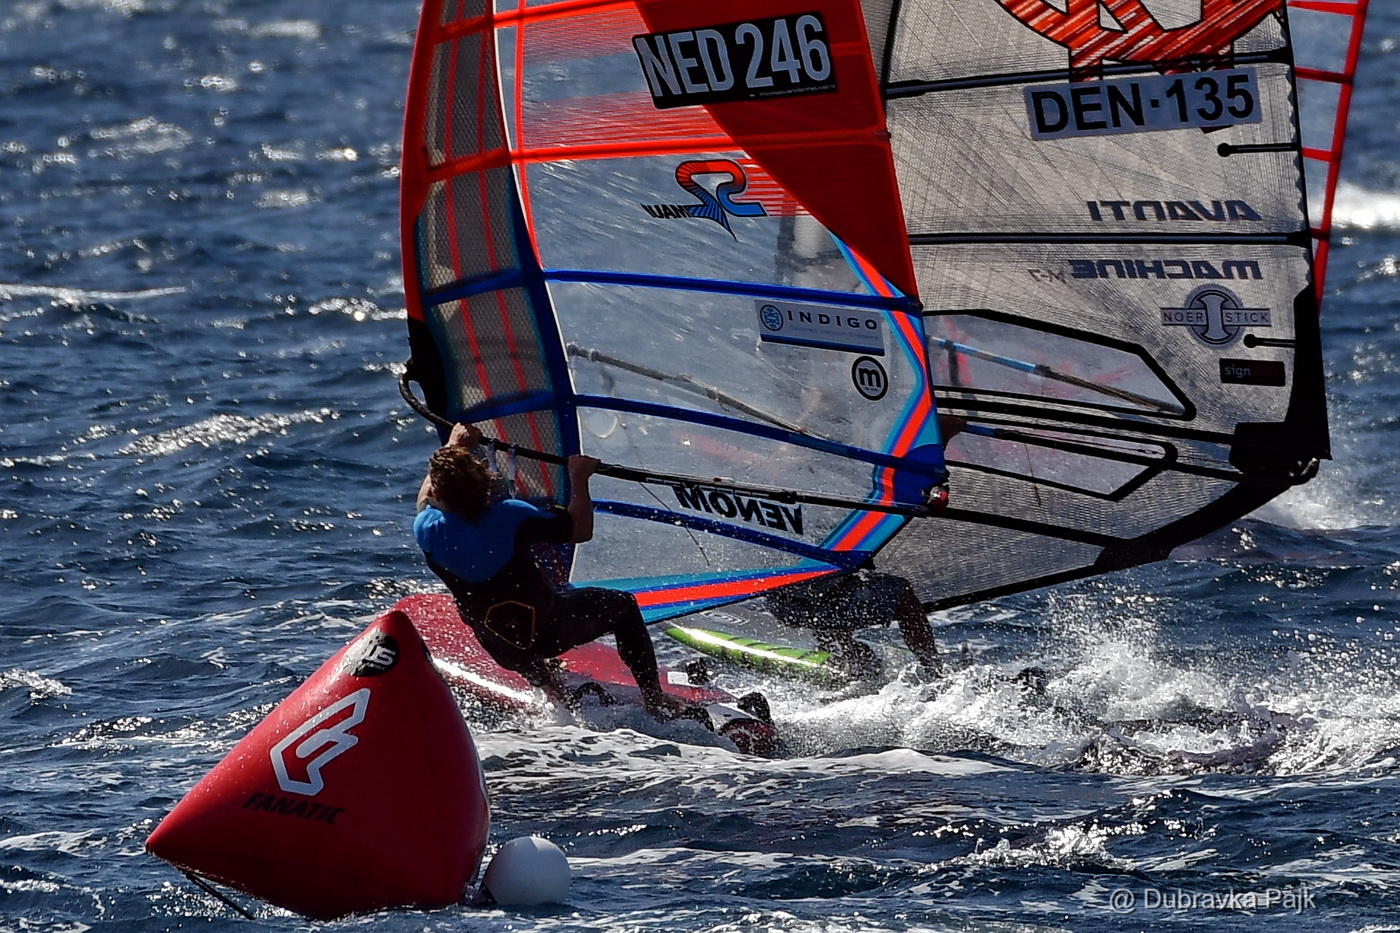 One of the most popular places for windsurfing, El Médano